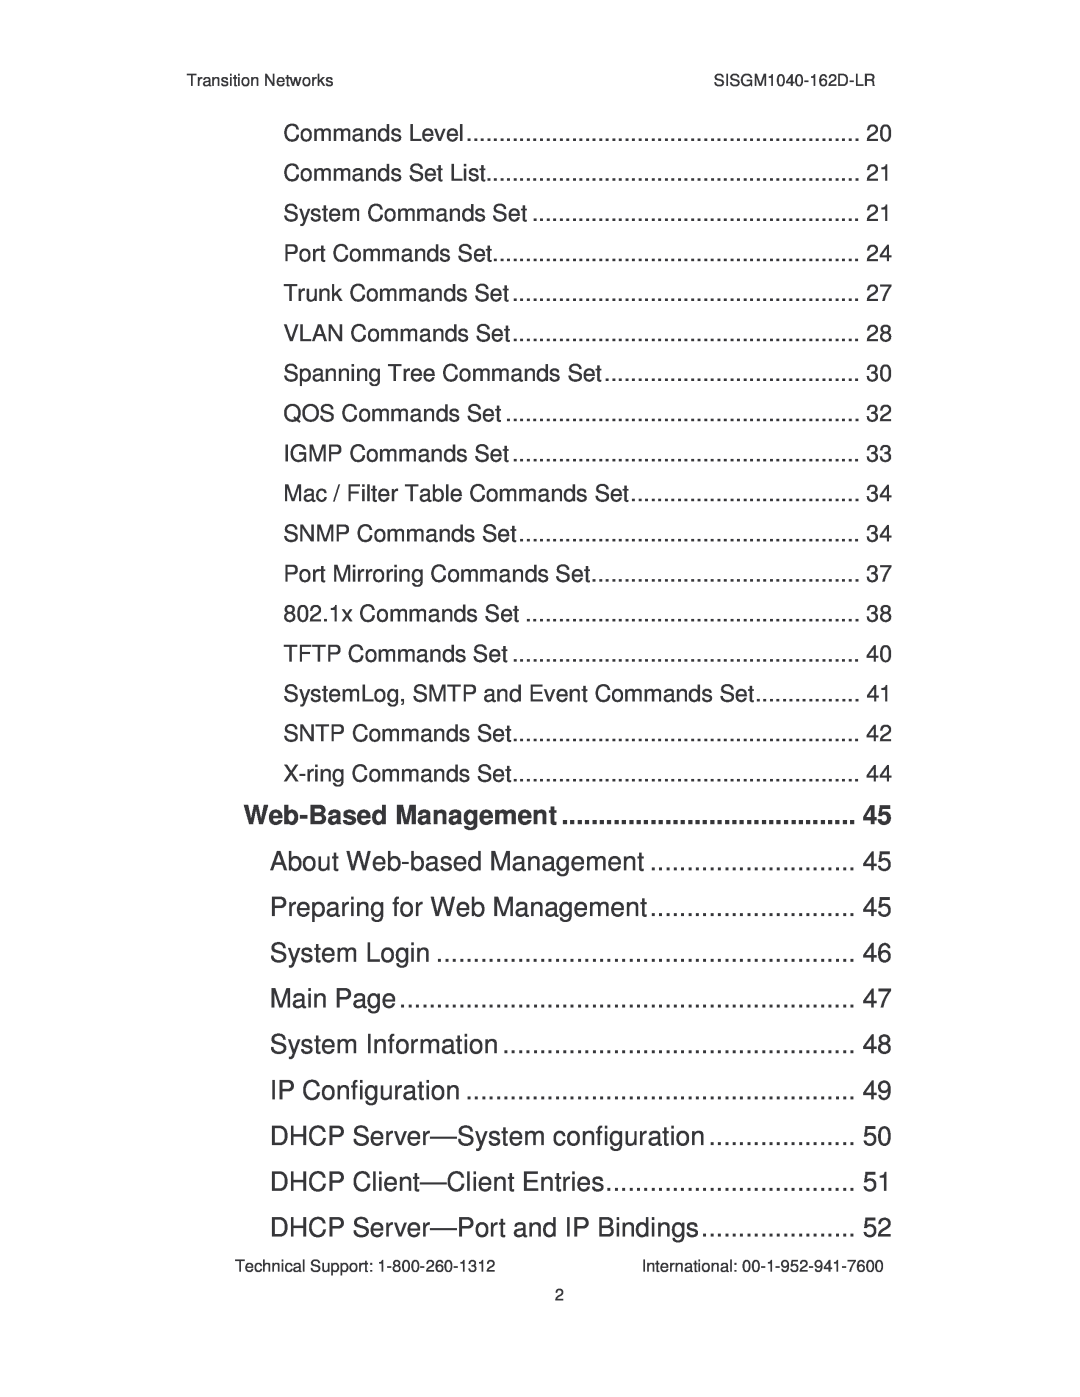 Transition Networks SISGM1040-162D manual About Web-based Management, Preparing for Web Management, System Login, Main Page 